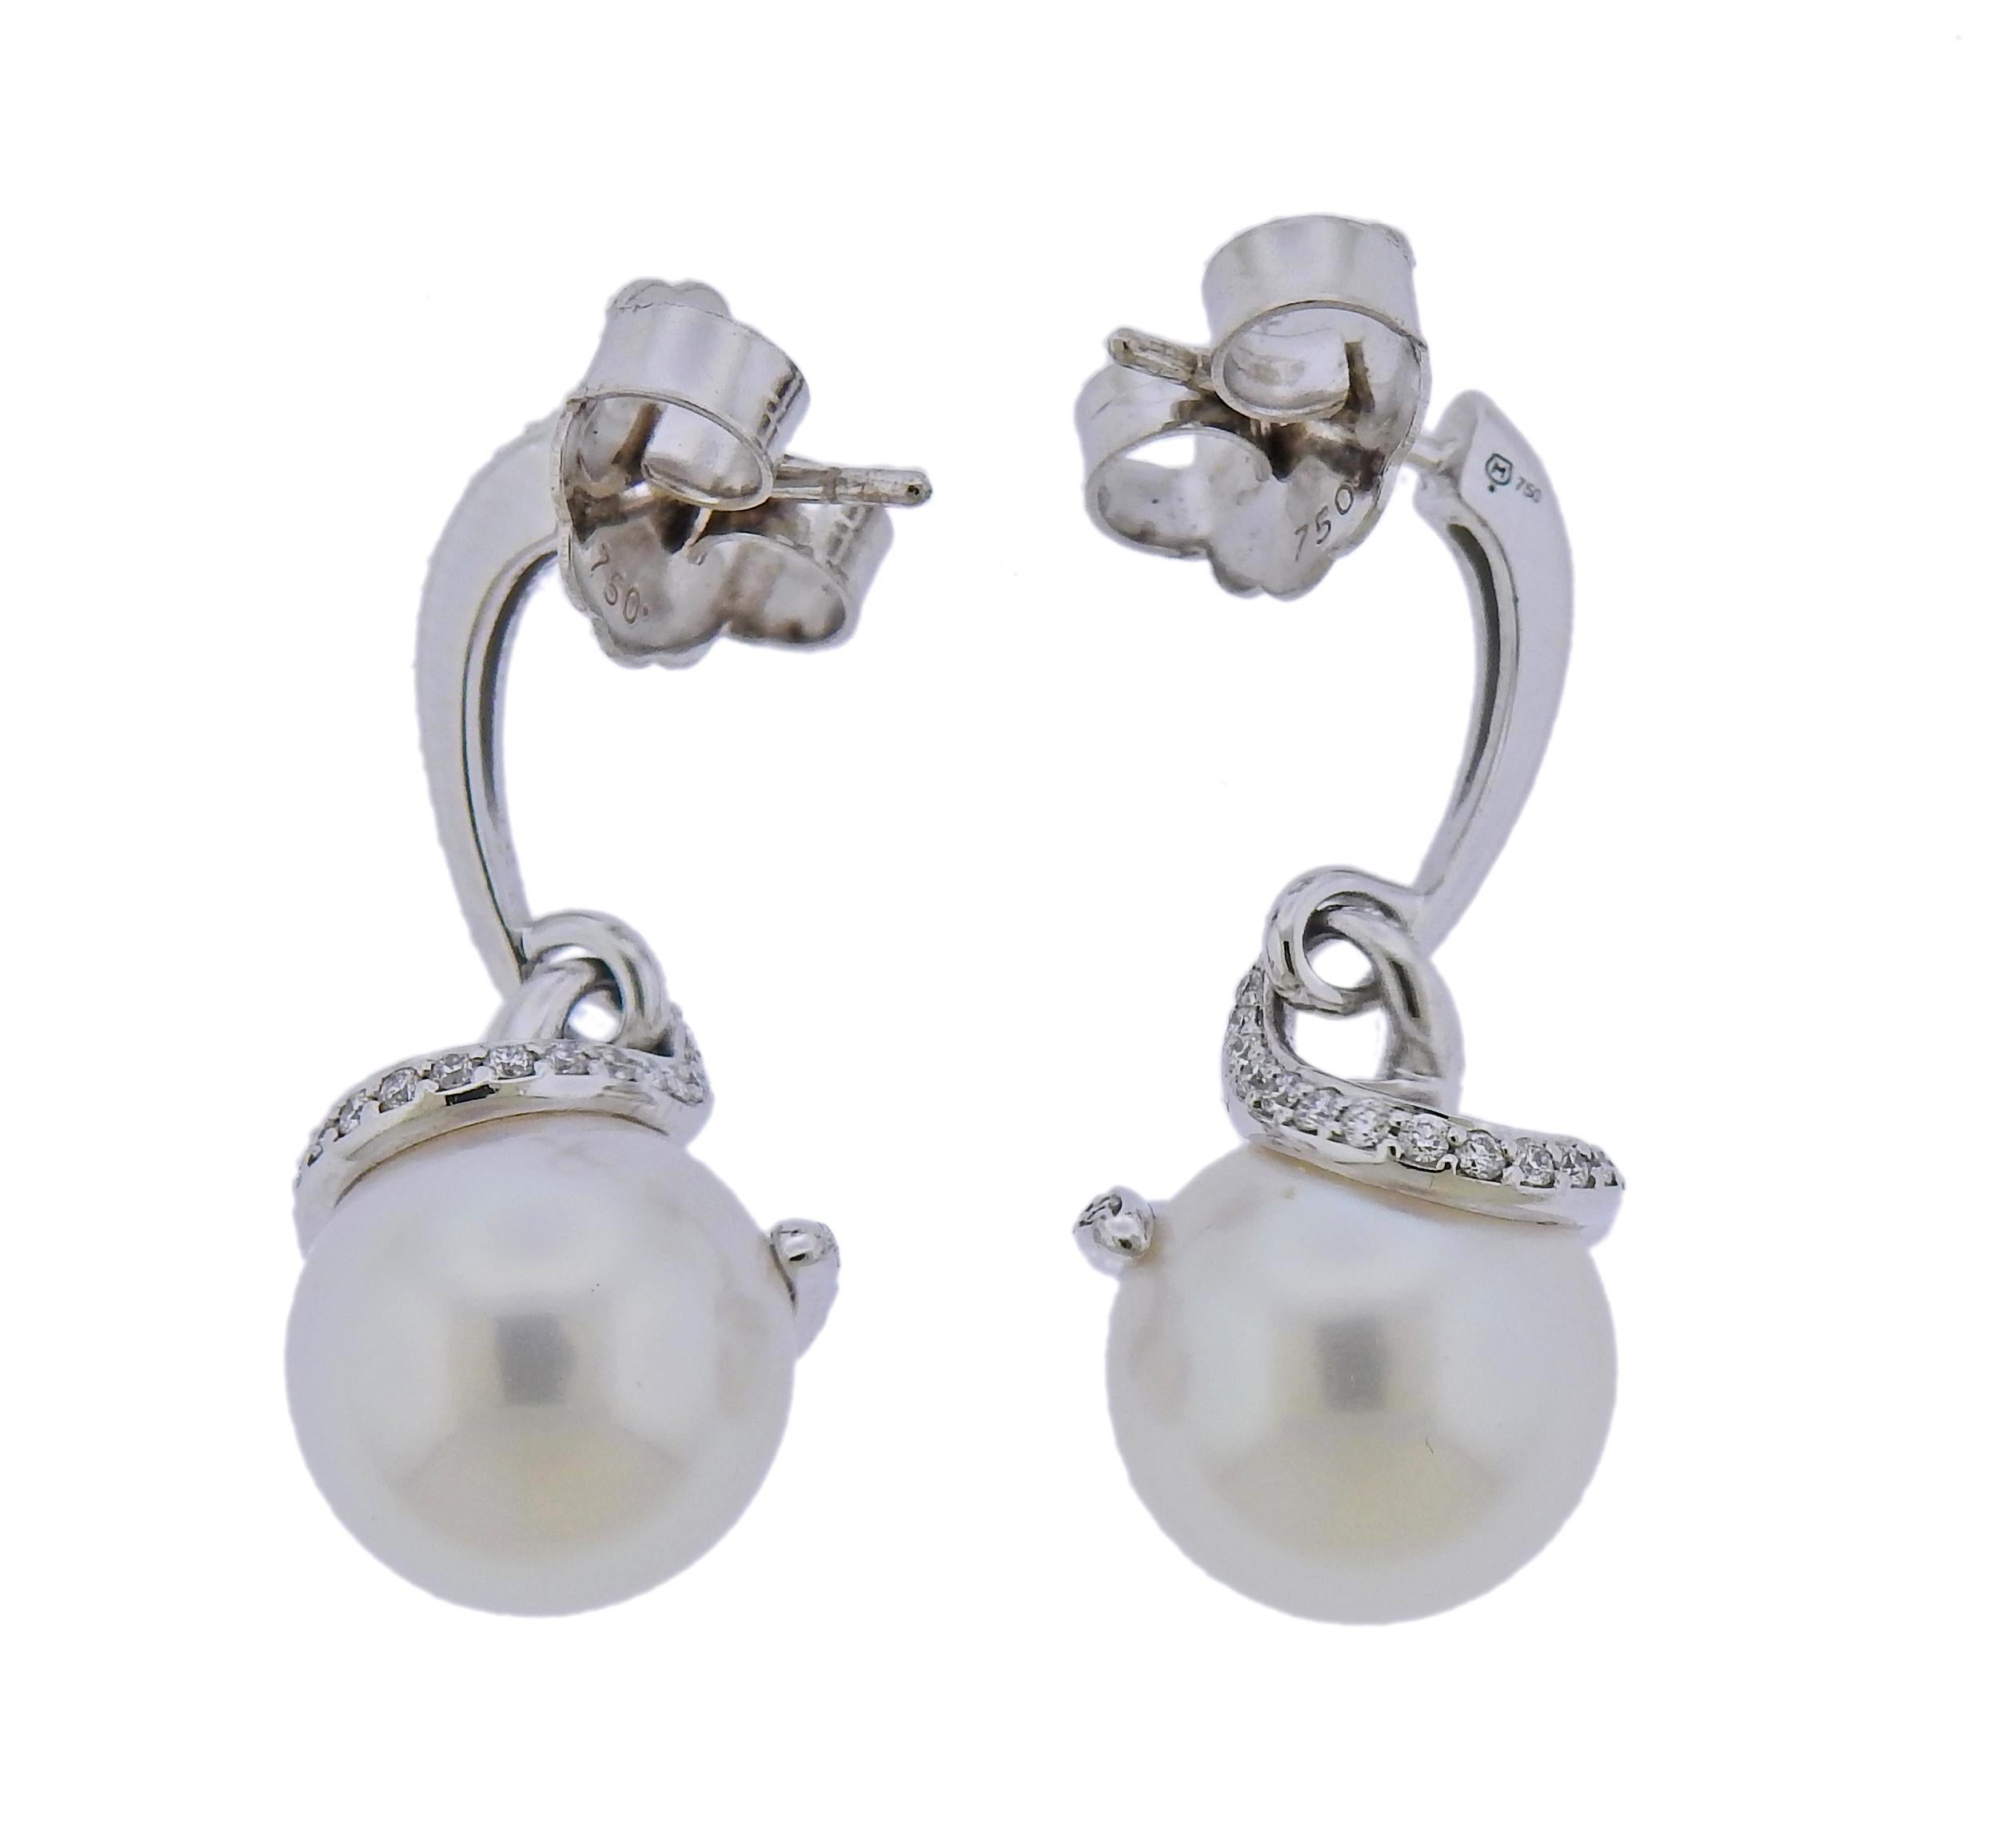 Pair of new 18k white gold twist earrings by Mikimoto, set with A+ 11mm South Sea pearls and approx. 0.45ctw G/VS diamonds. Retail $11000. Come with box and warranty. Earrings are 29mm long. Weight - 10.3 grams. Marked: M mark 750. 